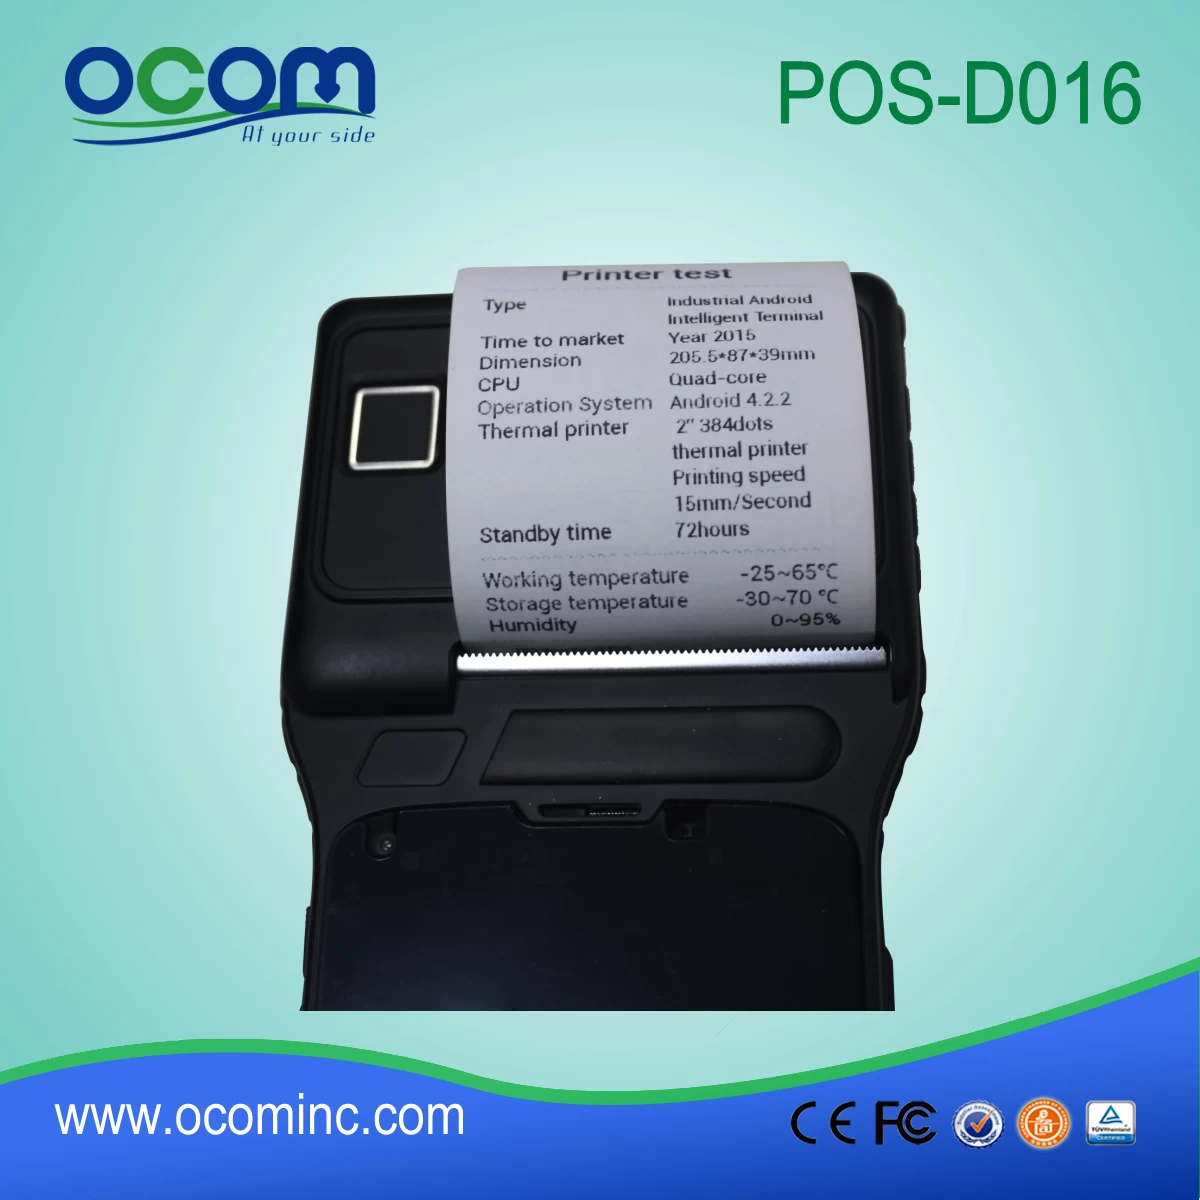 handheld Android  industrial PDA with mobile printer (OCBS-D016)